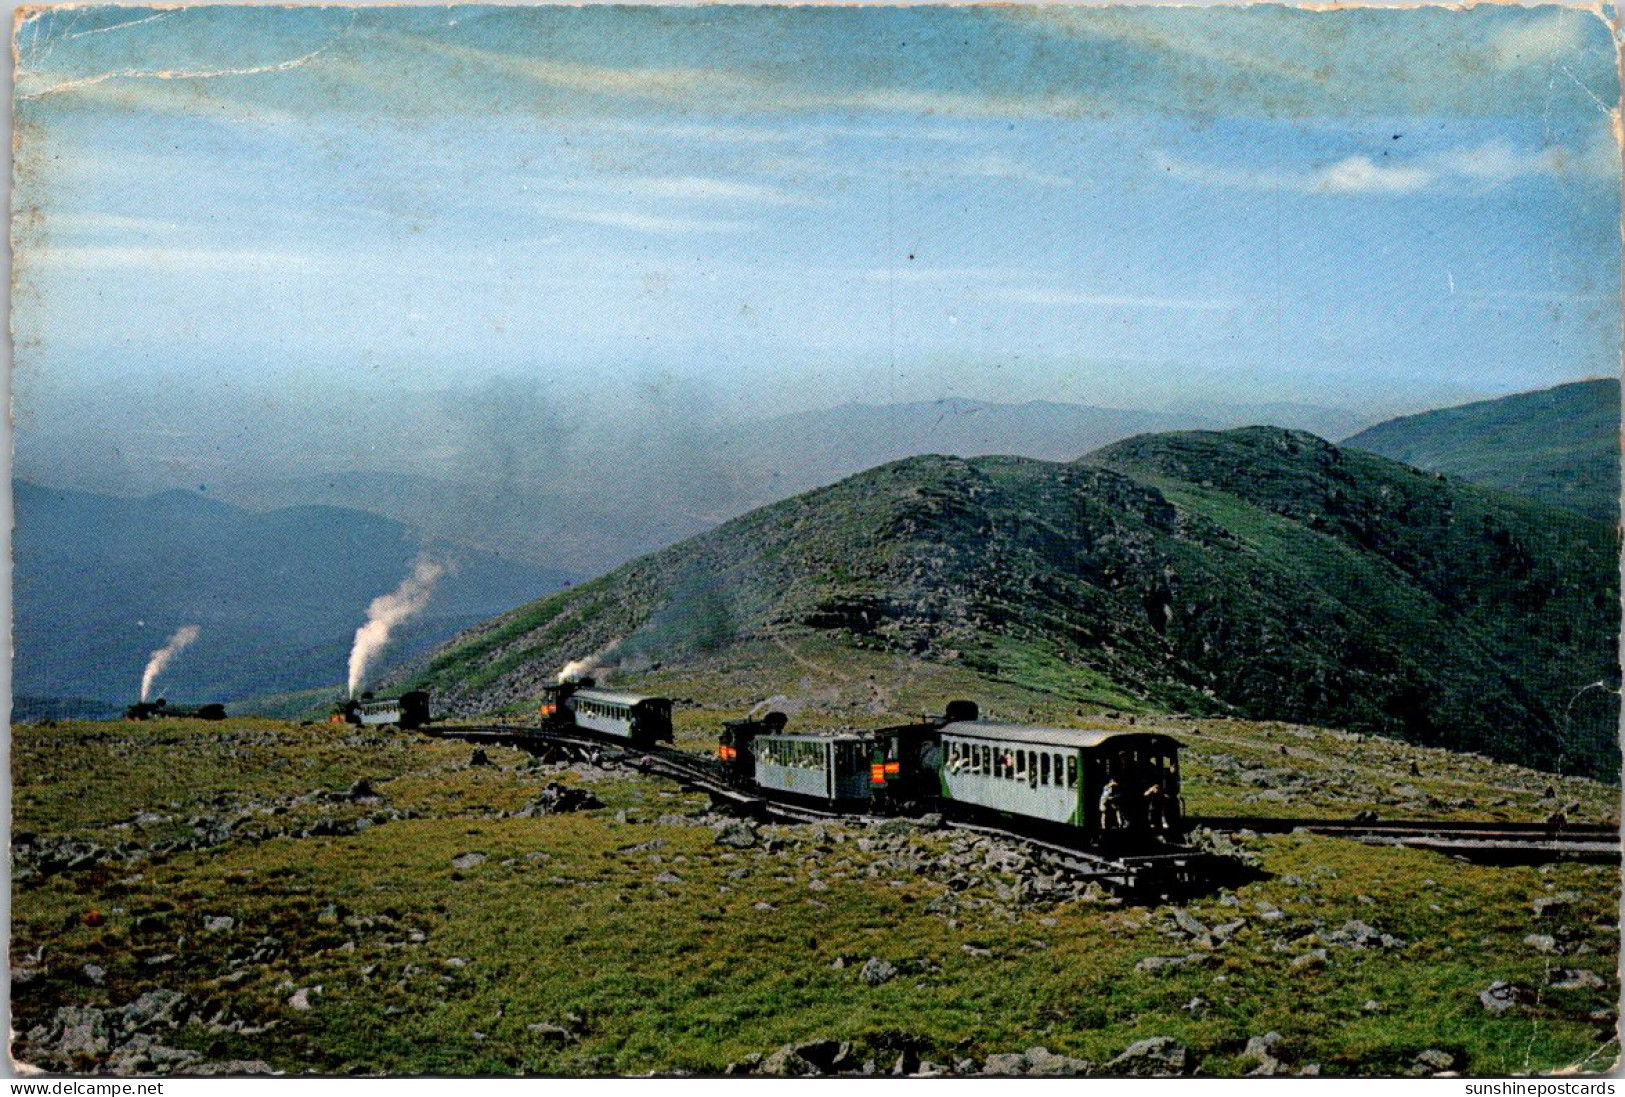 New Hampshire A Busy Day At The Mt Washington Cog Railway 1969 - White Mountains